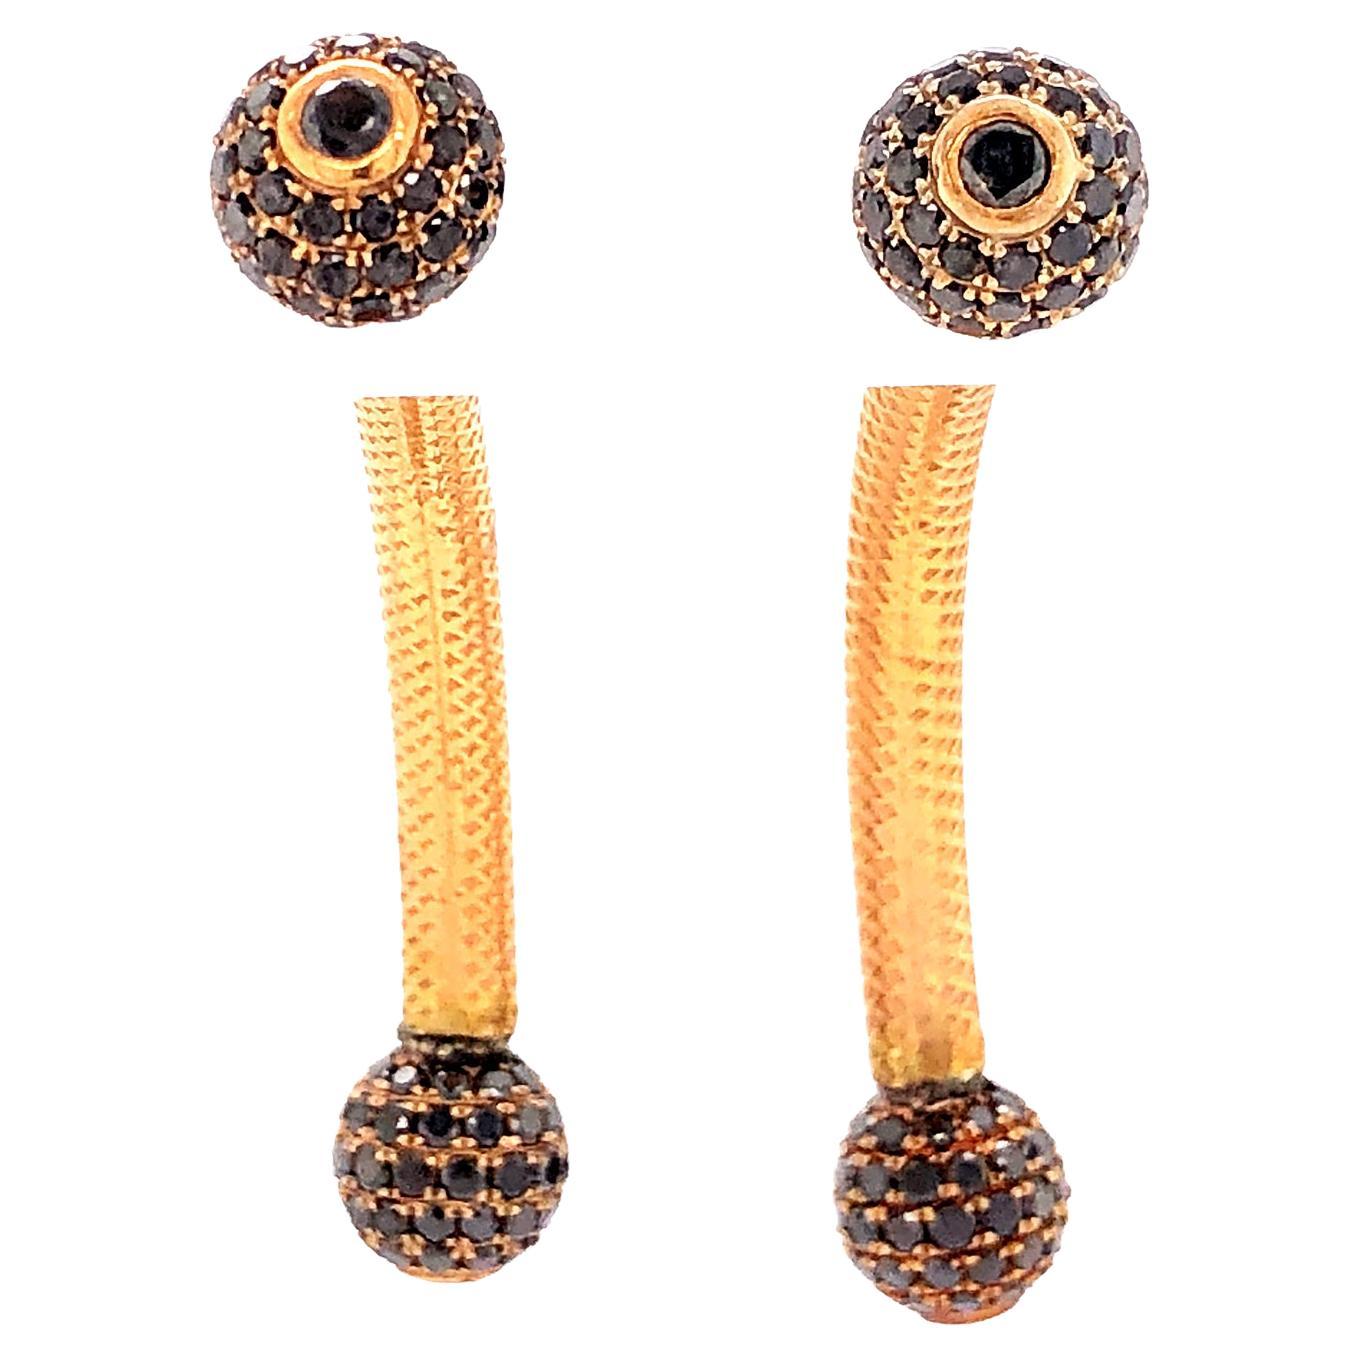 Pave Diamond Ball Earrings Made In 18k Rose Gold & Silver